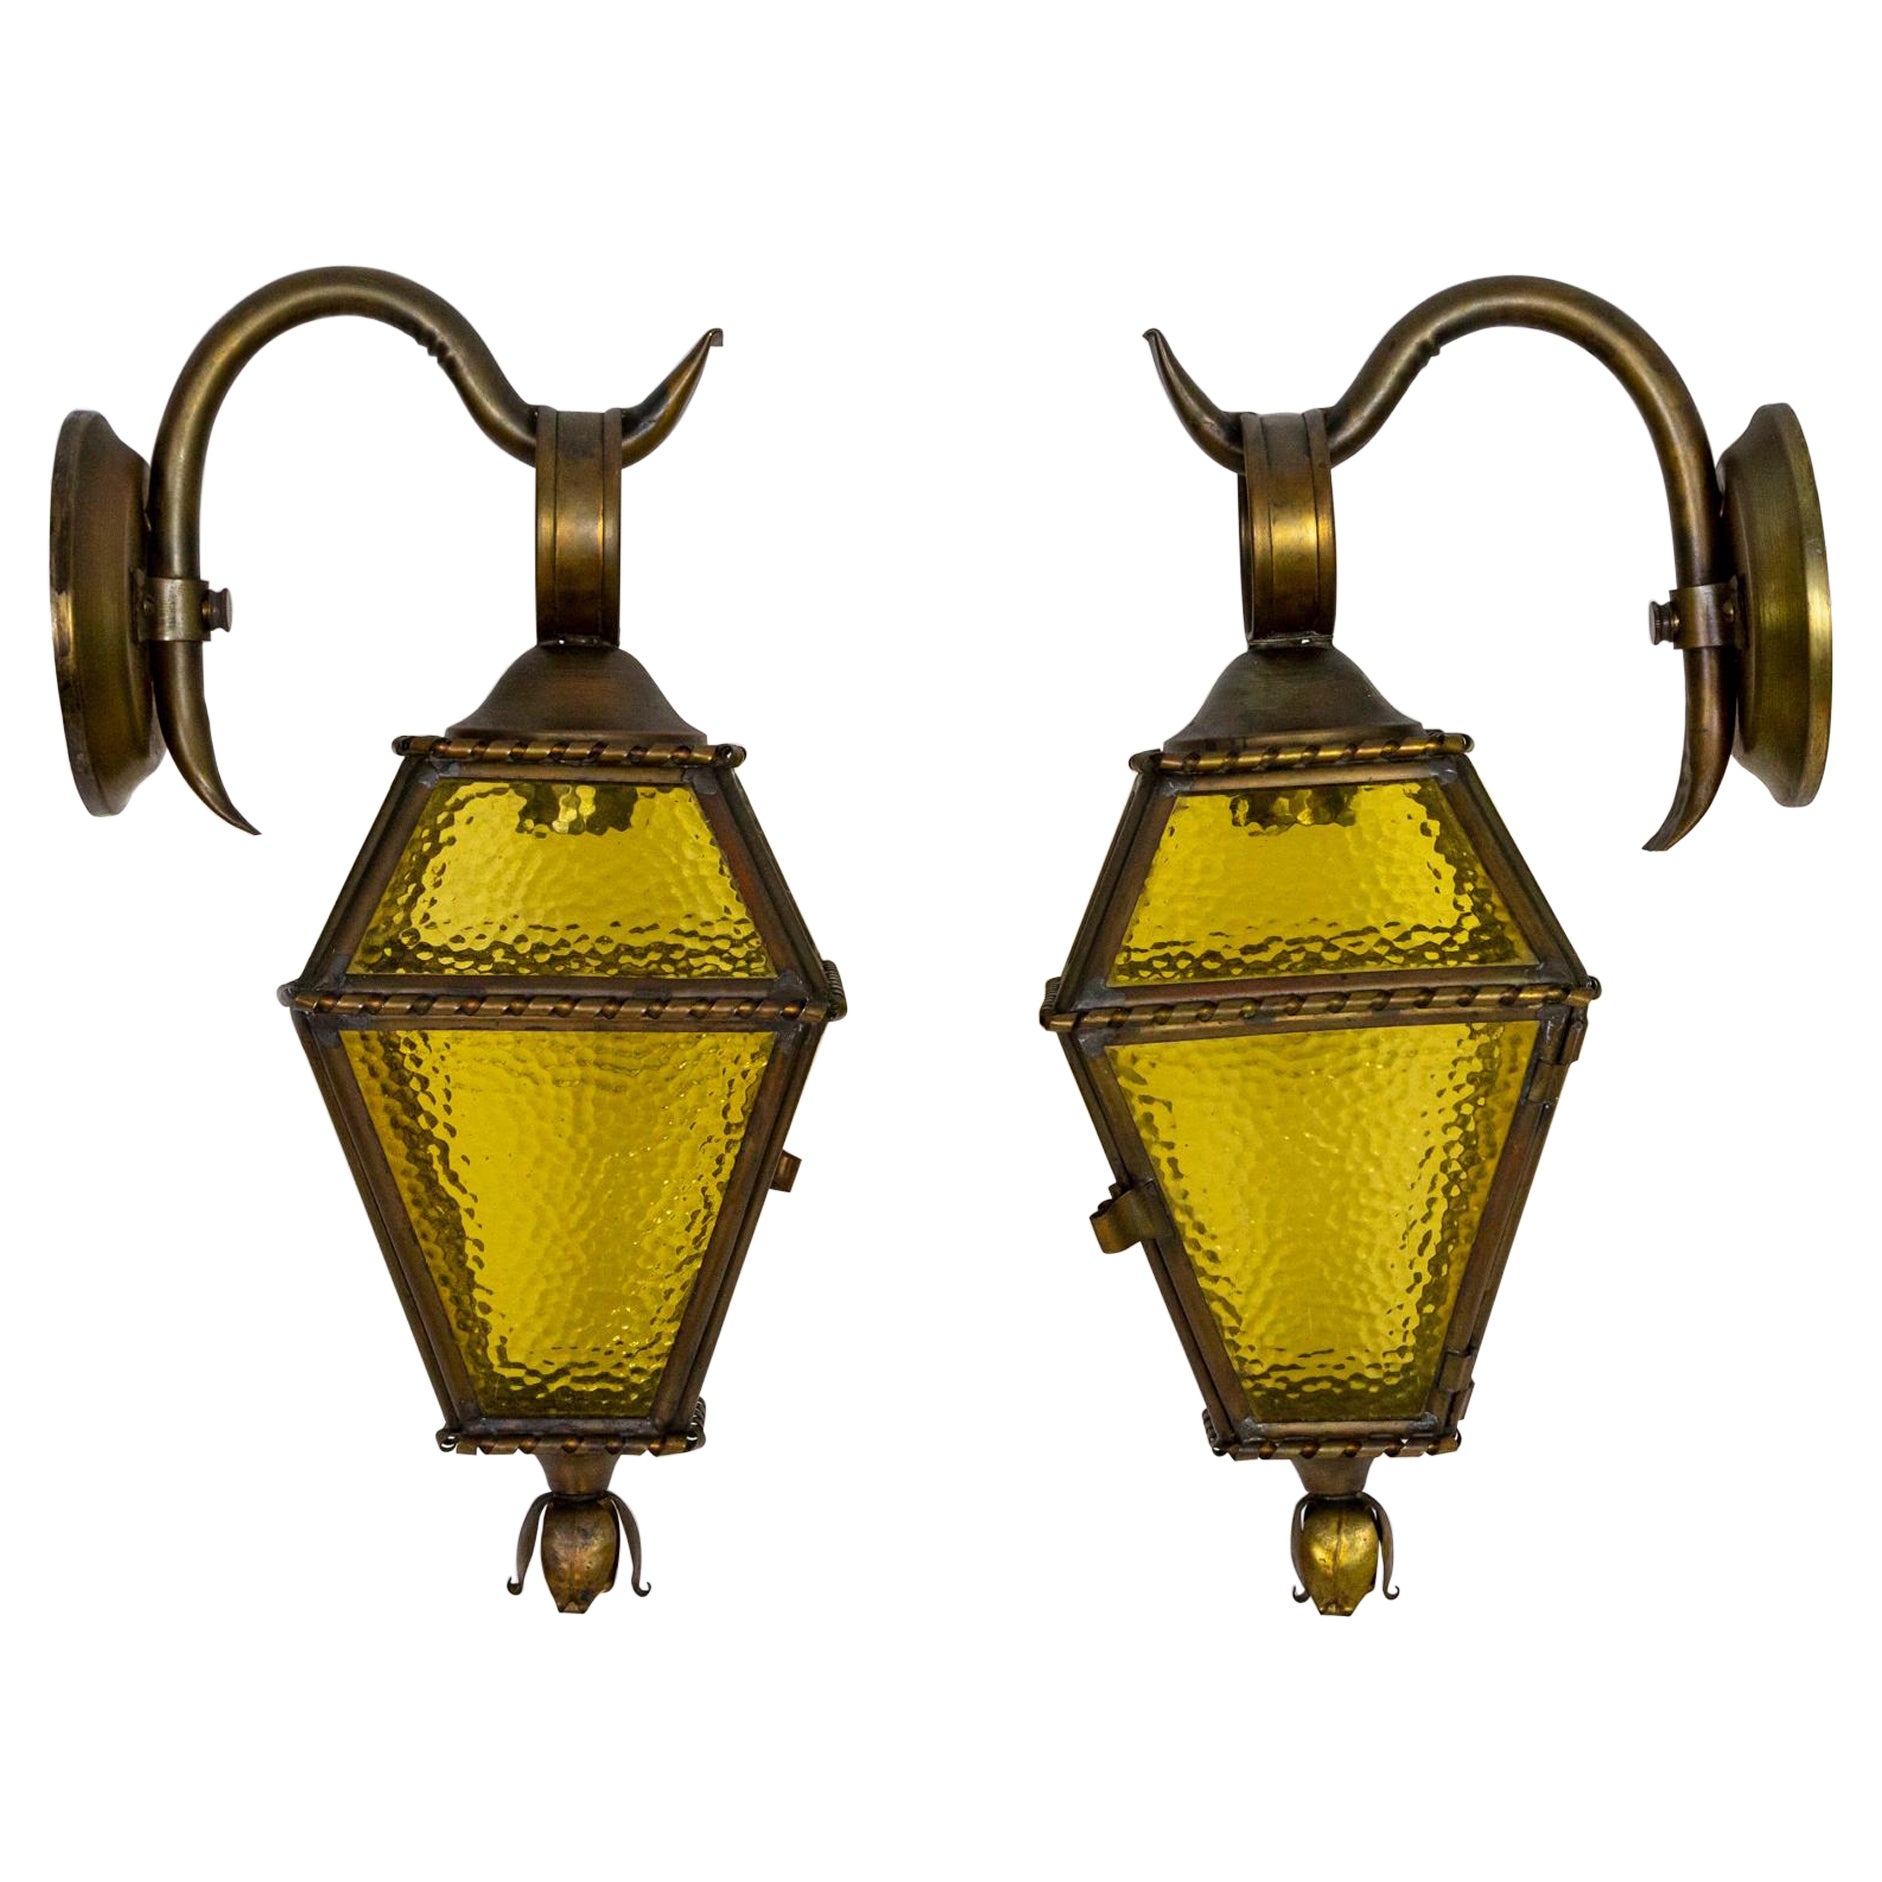 1920s Copper, Brass & Amber Glass Scroll Arm Sconces, 'Pair'